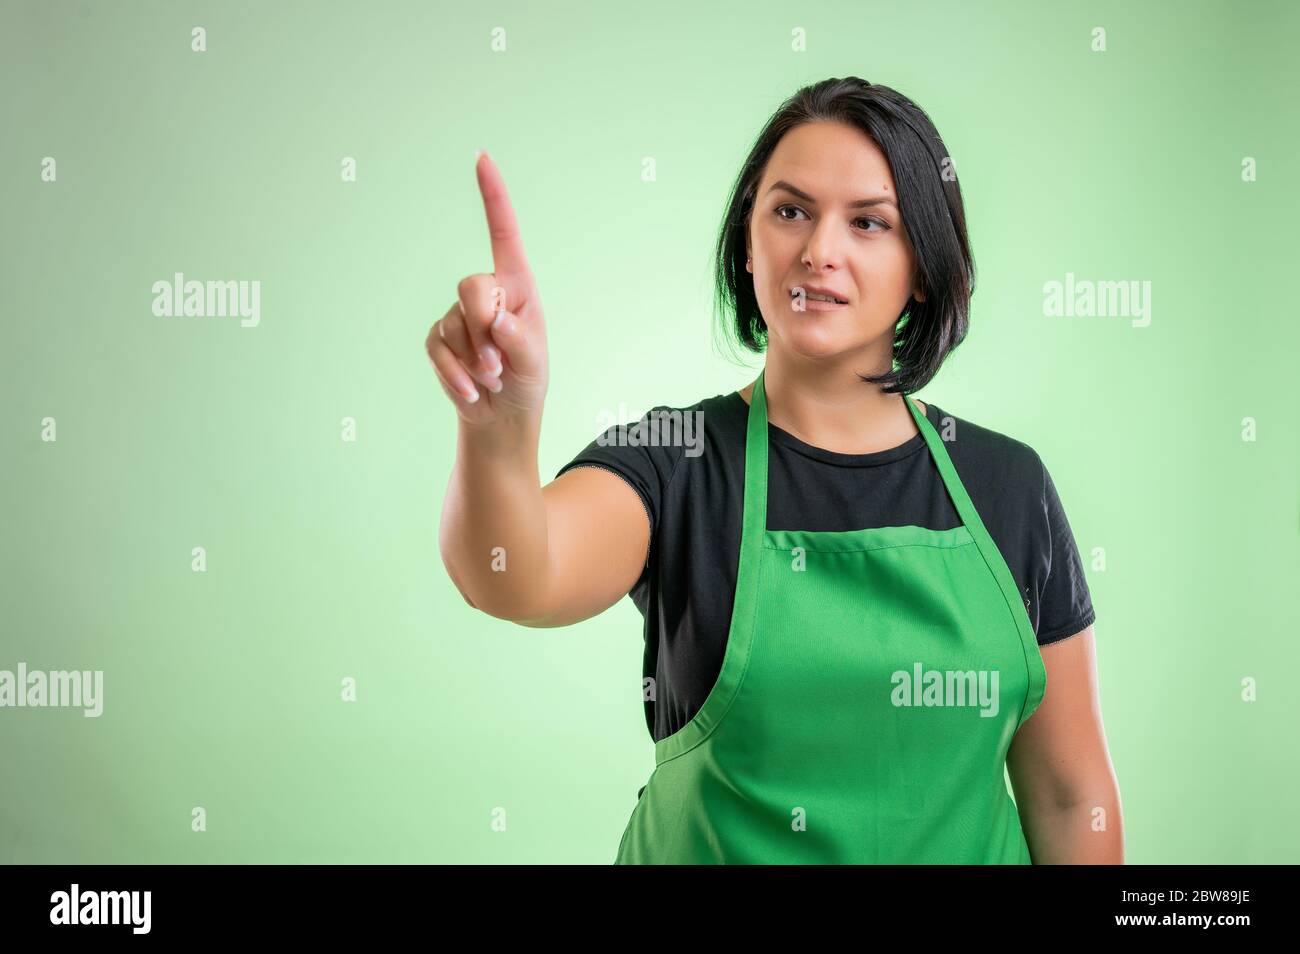 Female cook with green apron and black t-shirt, presses a virtual button isolated on green background Stock Photo